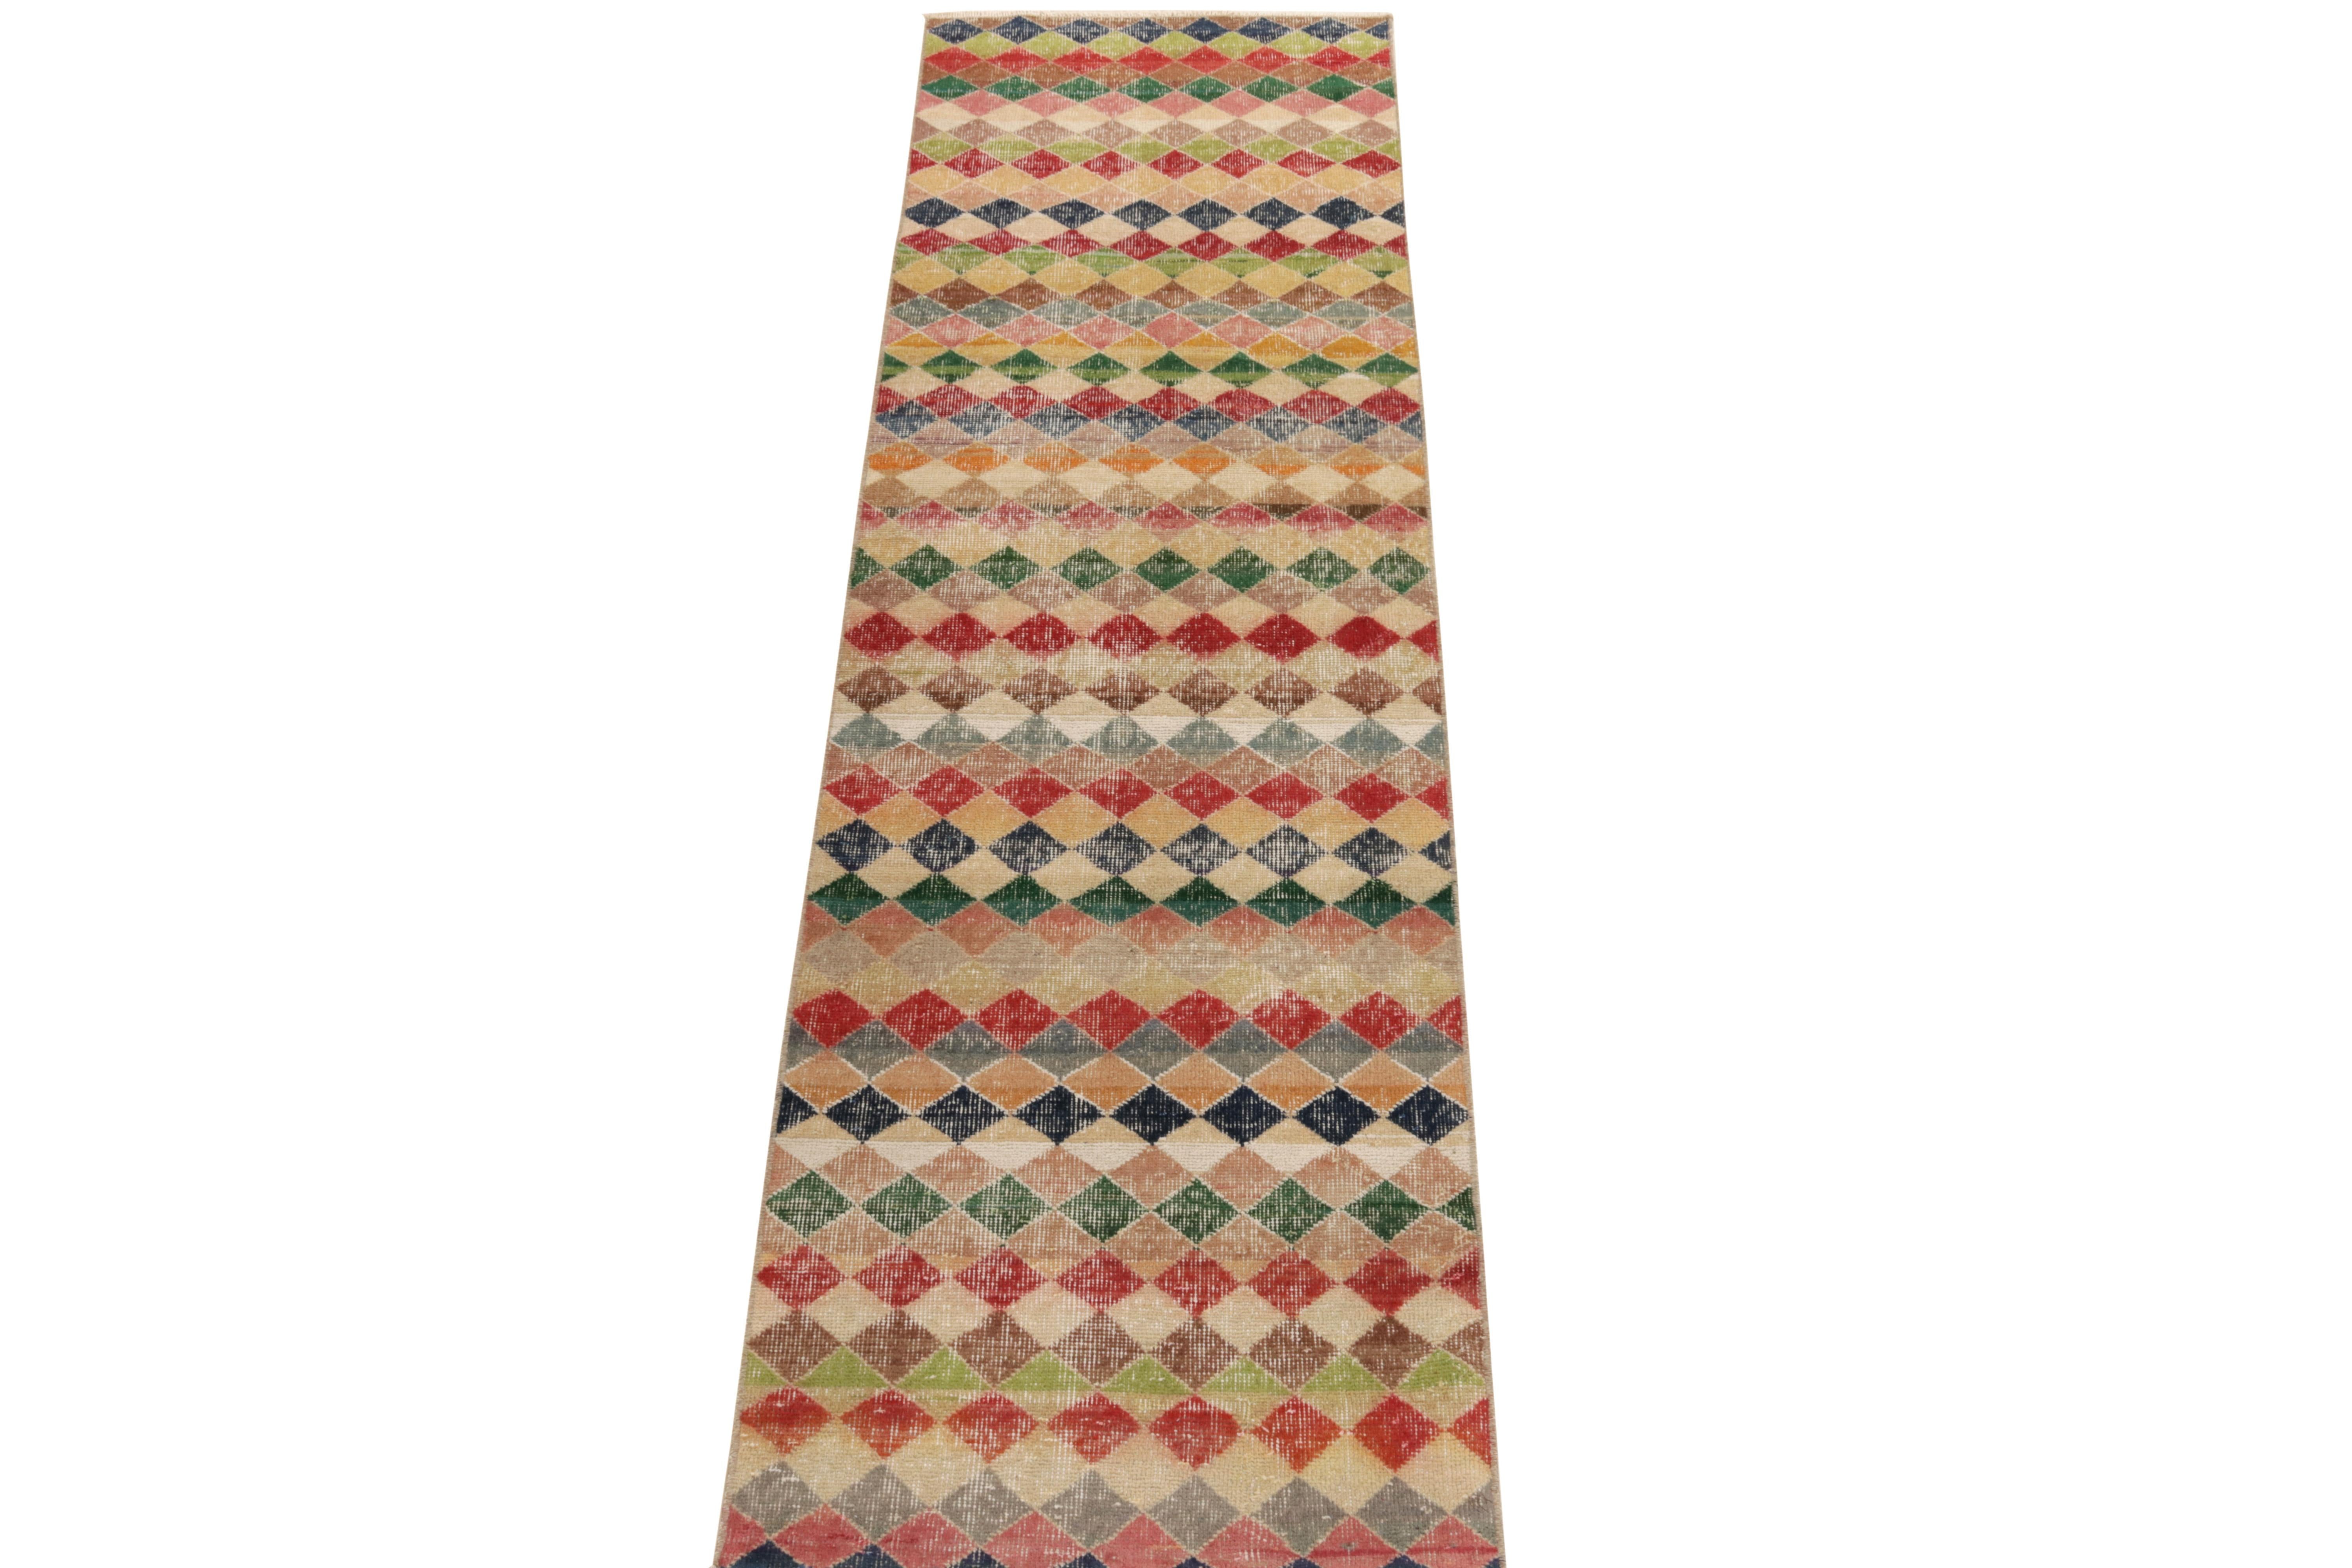 From Rug & Kilim’s Mid-Century Pasha collection, a 1960s piece celebrating the works of a bold designer from Turkey. 

Hand-knotted in wool, this 3x9 runner revels in the artist’s distinguished Deco style diamond pattern that lends an exceptional